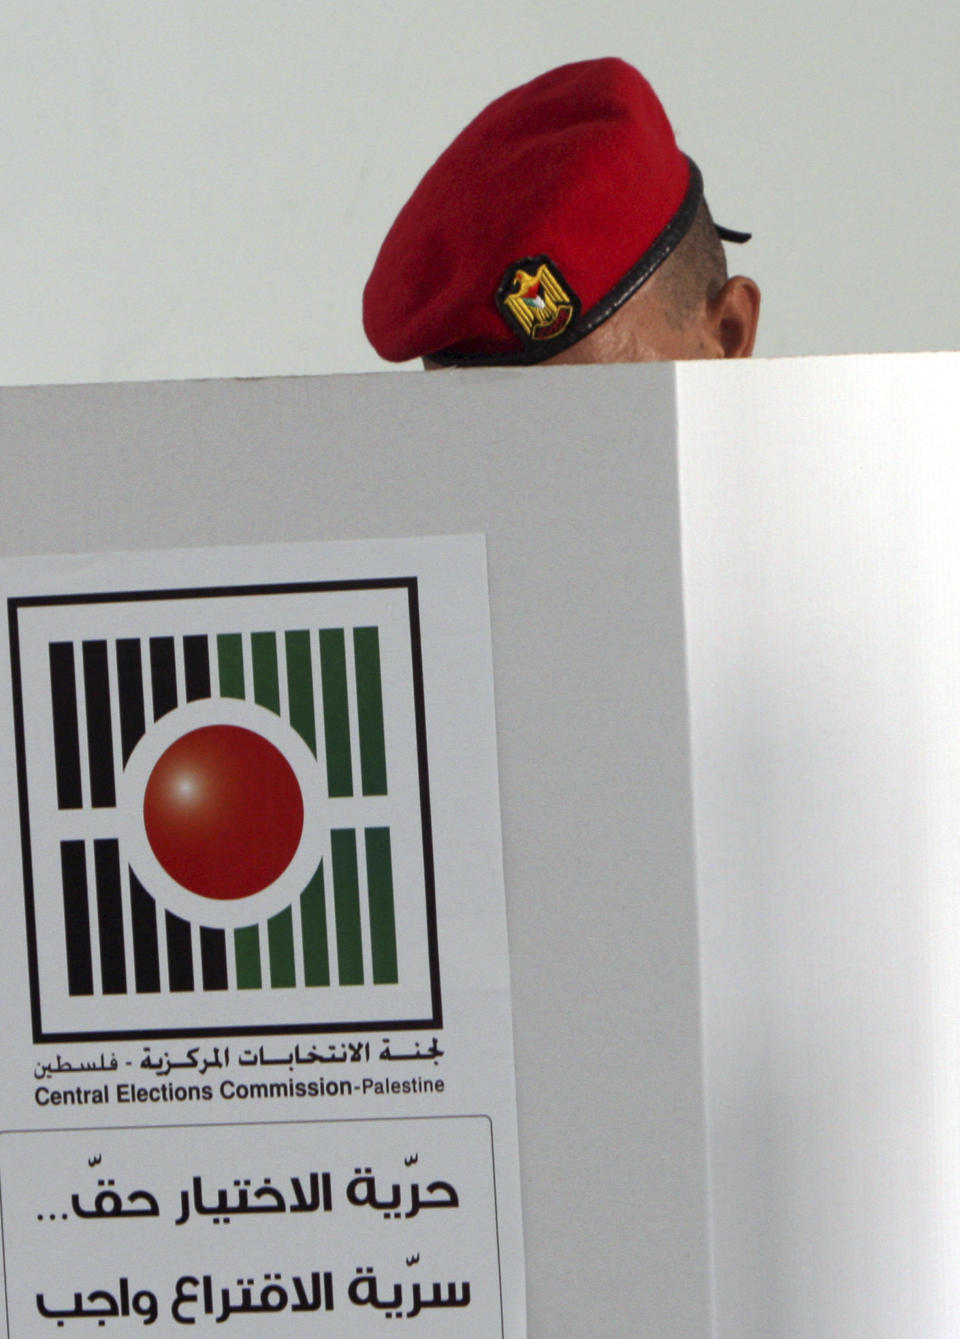 A Palestinian police officer casts an early vote during local elections at a polling station in the West Bank town of Jenin, Thursday, Oct. 18, 2012. Members of Palestinian security forces cast an early vote ahead of local elections which are to take place across the West Bank on October 20, 2012, in the first such polls since 2006. (AP Photo/Mohammed Ballas)